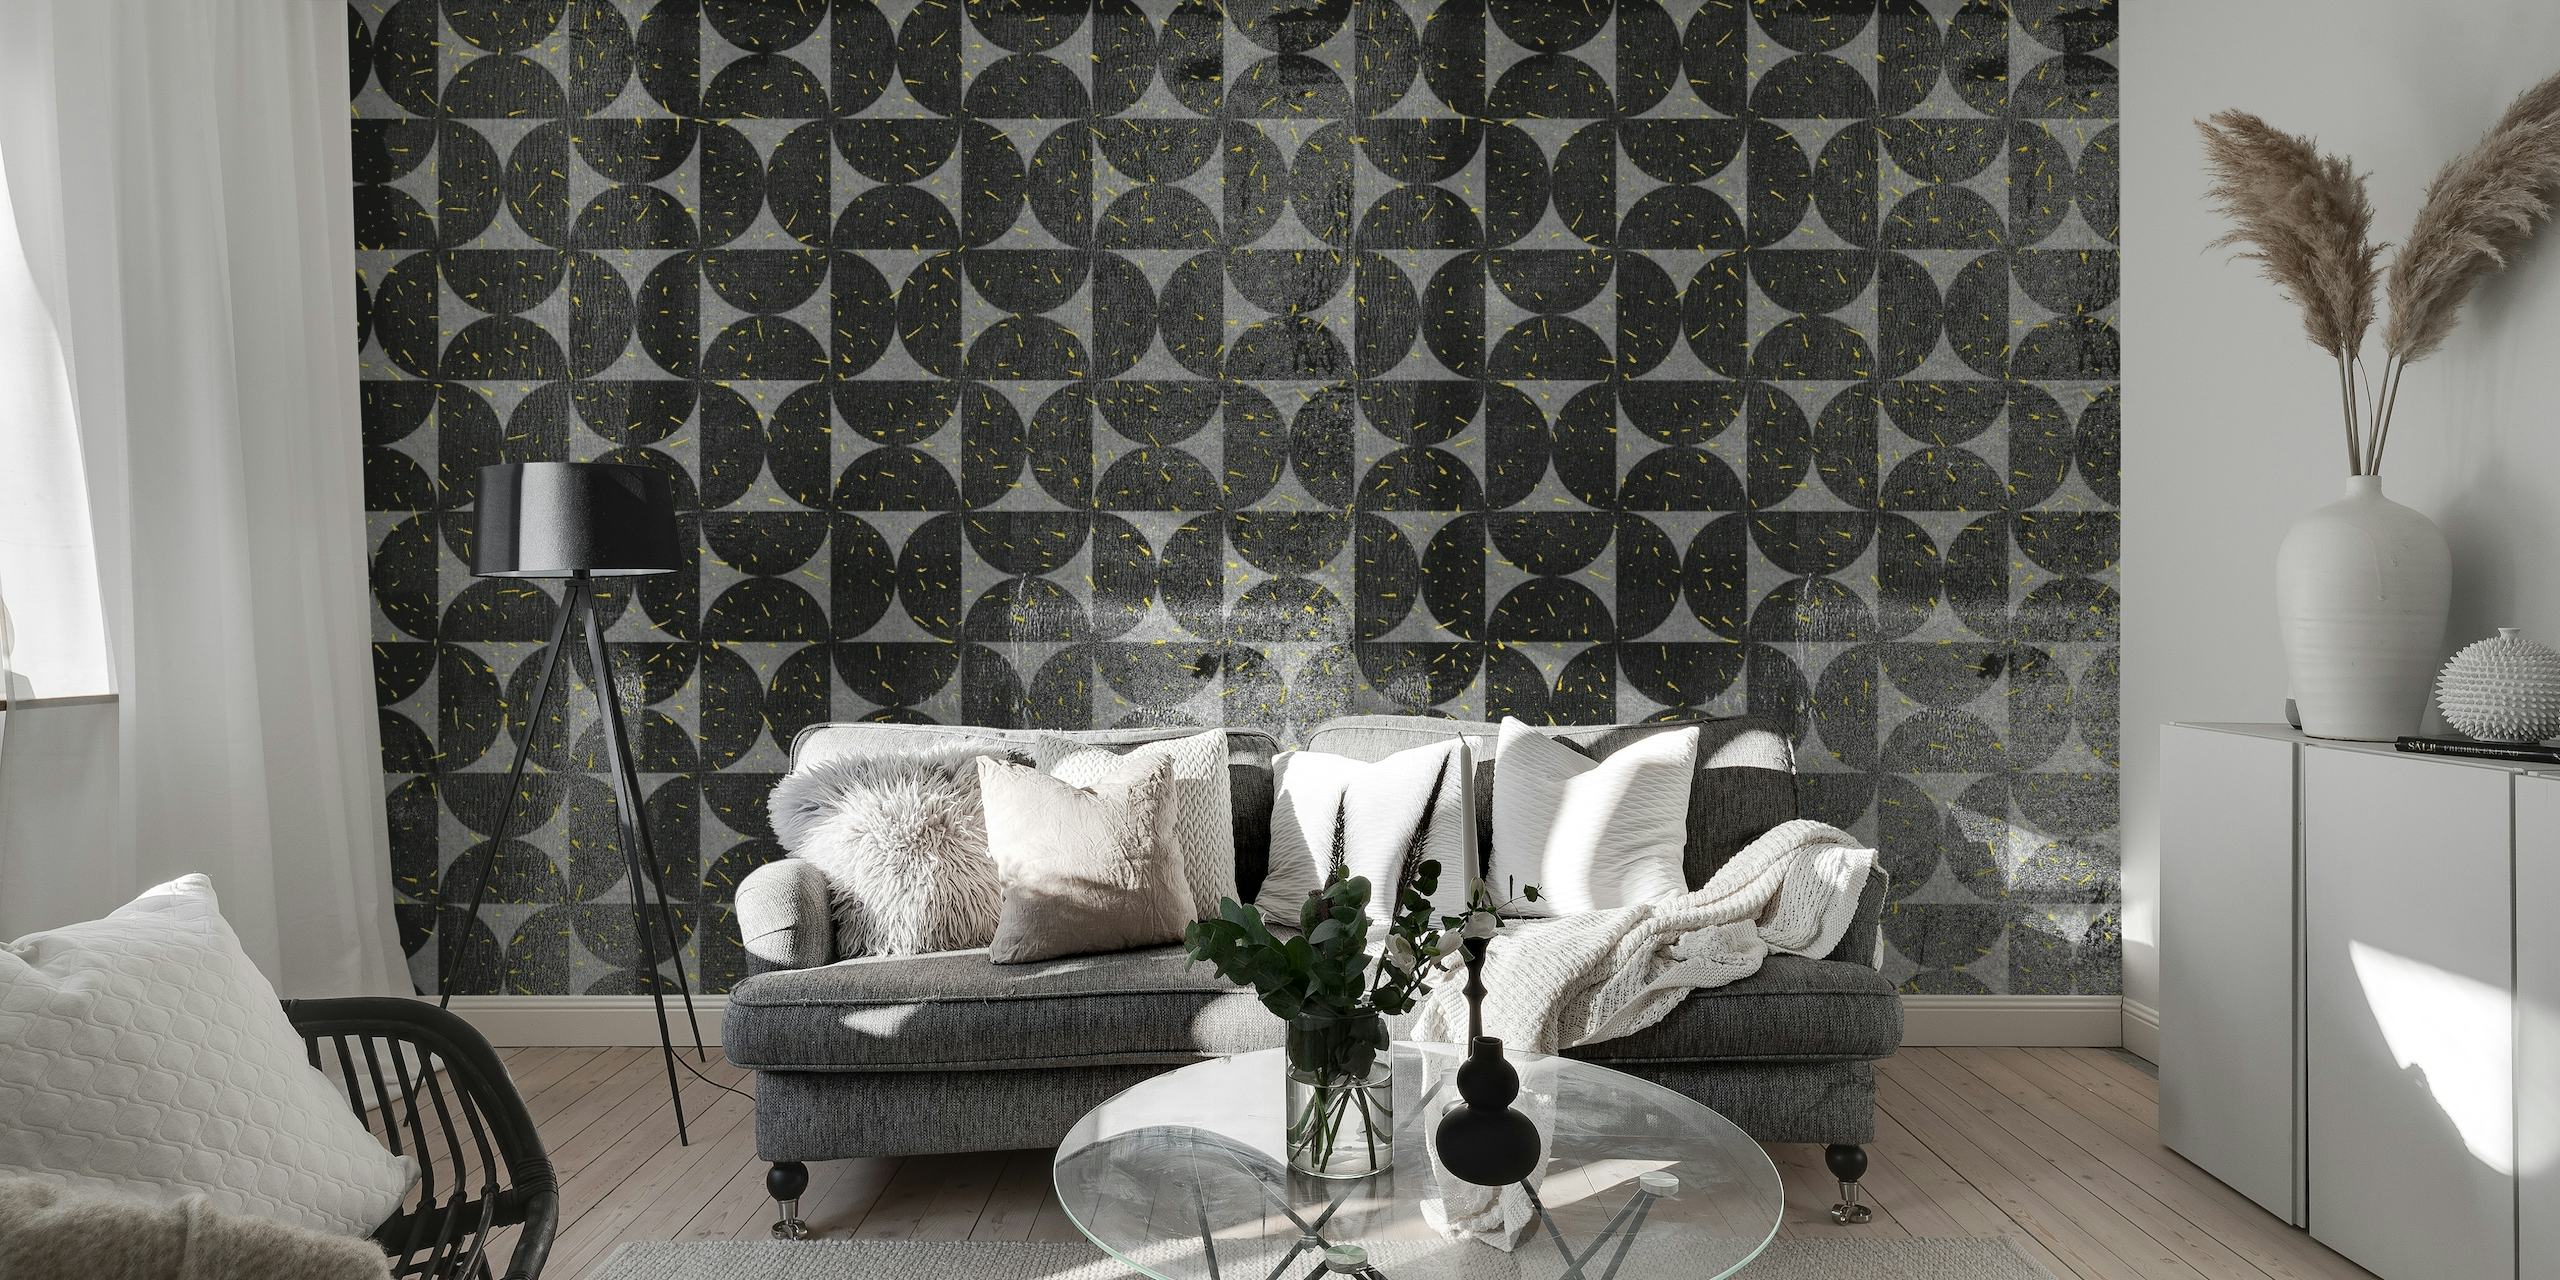 Abstract geometric pattern wall mural fading from dark to light